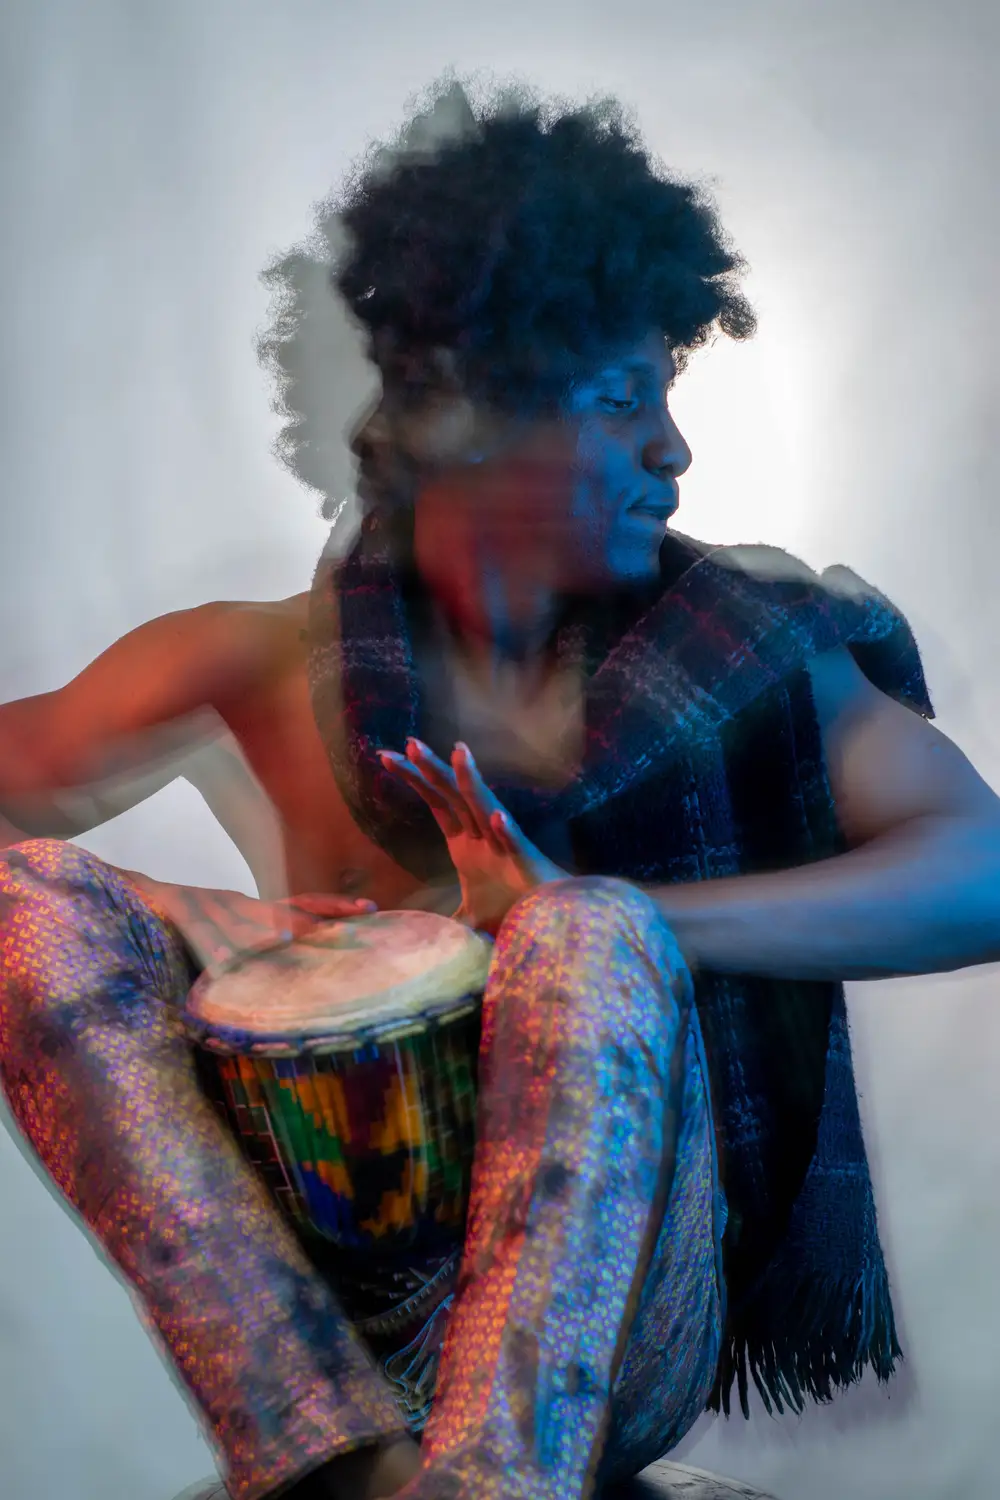 model on afro hairstyle plays his drum and looks away